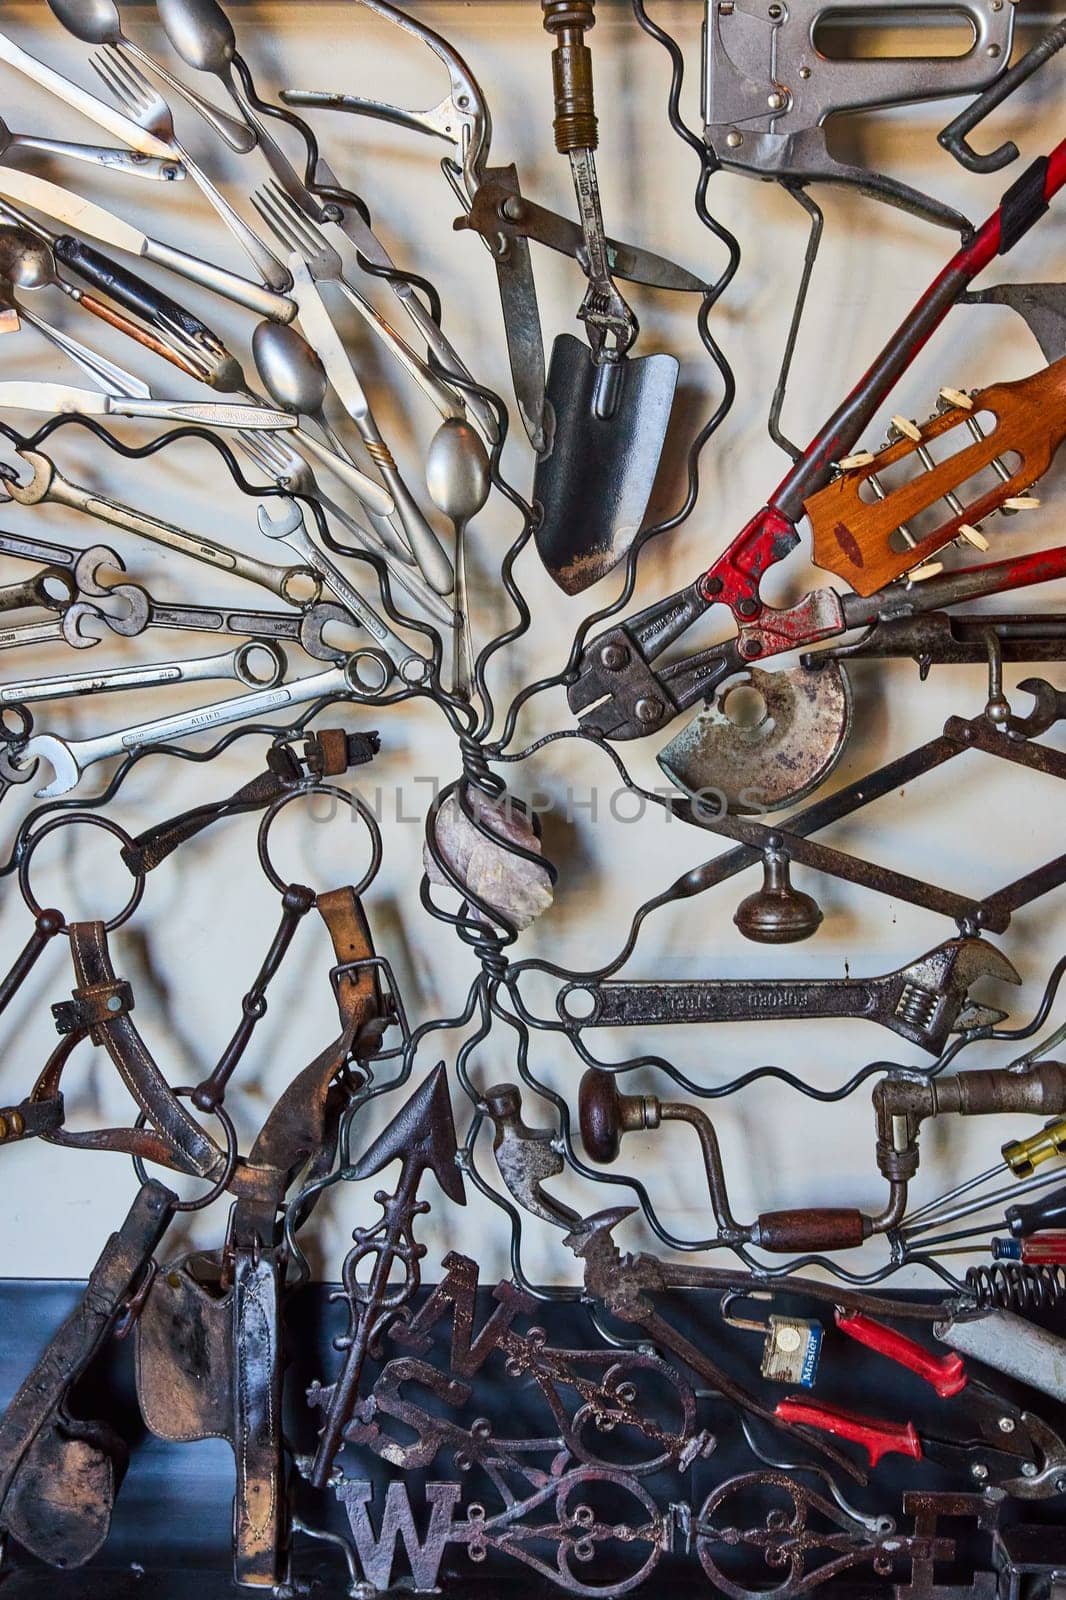 Wall of interconnecting tools connected by wires on white background by njproductions